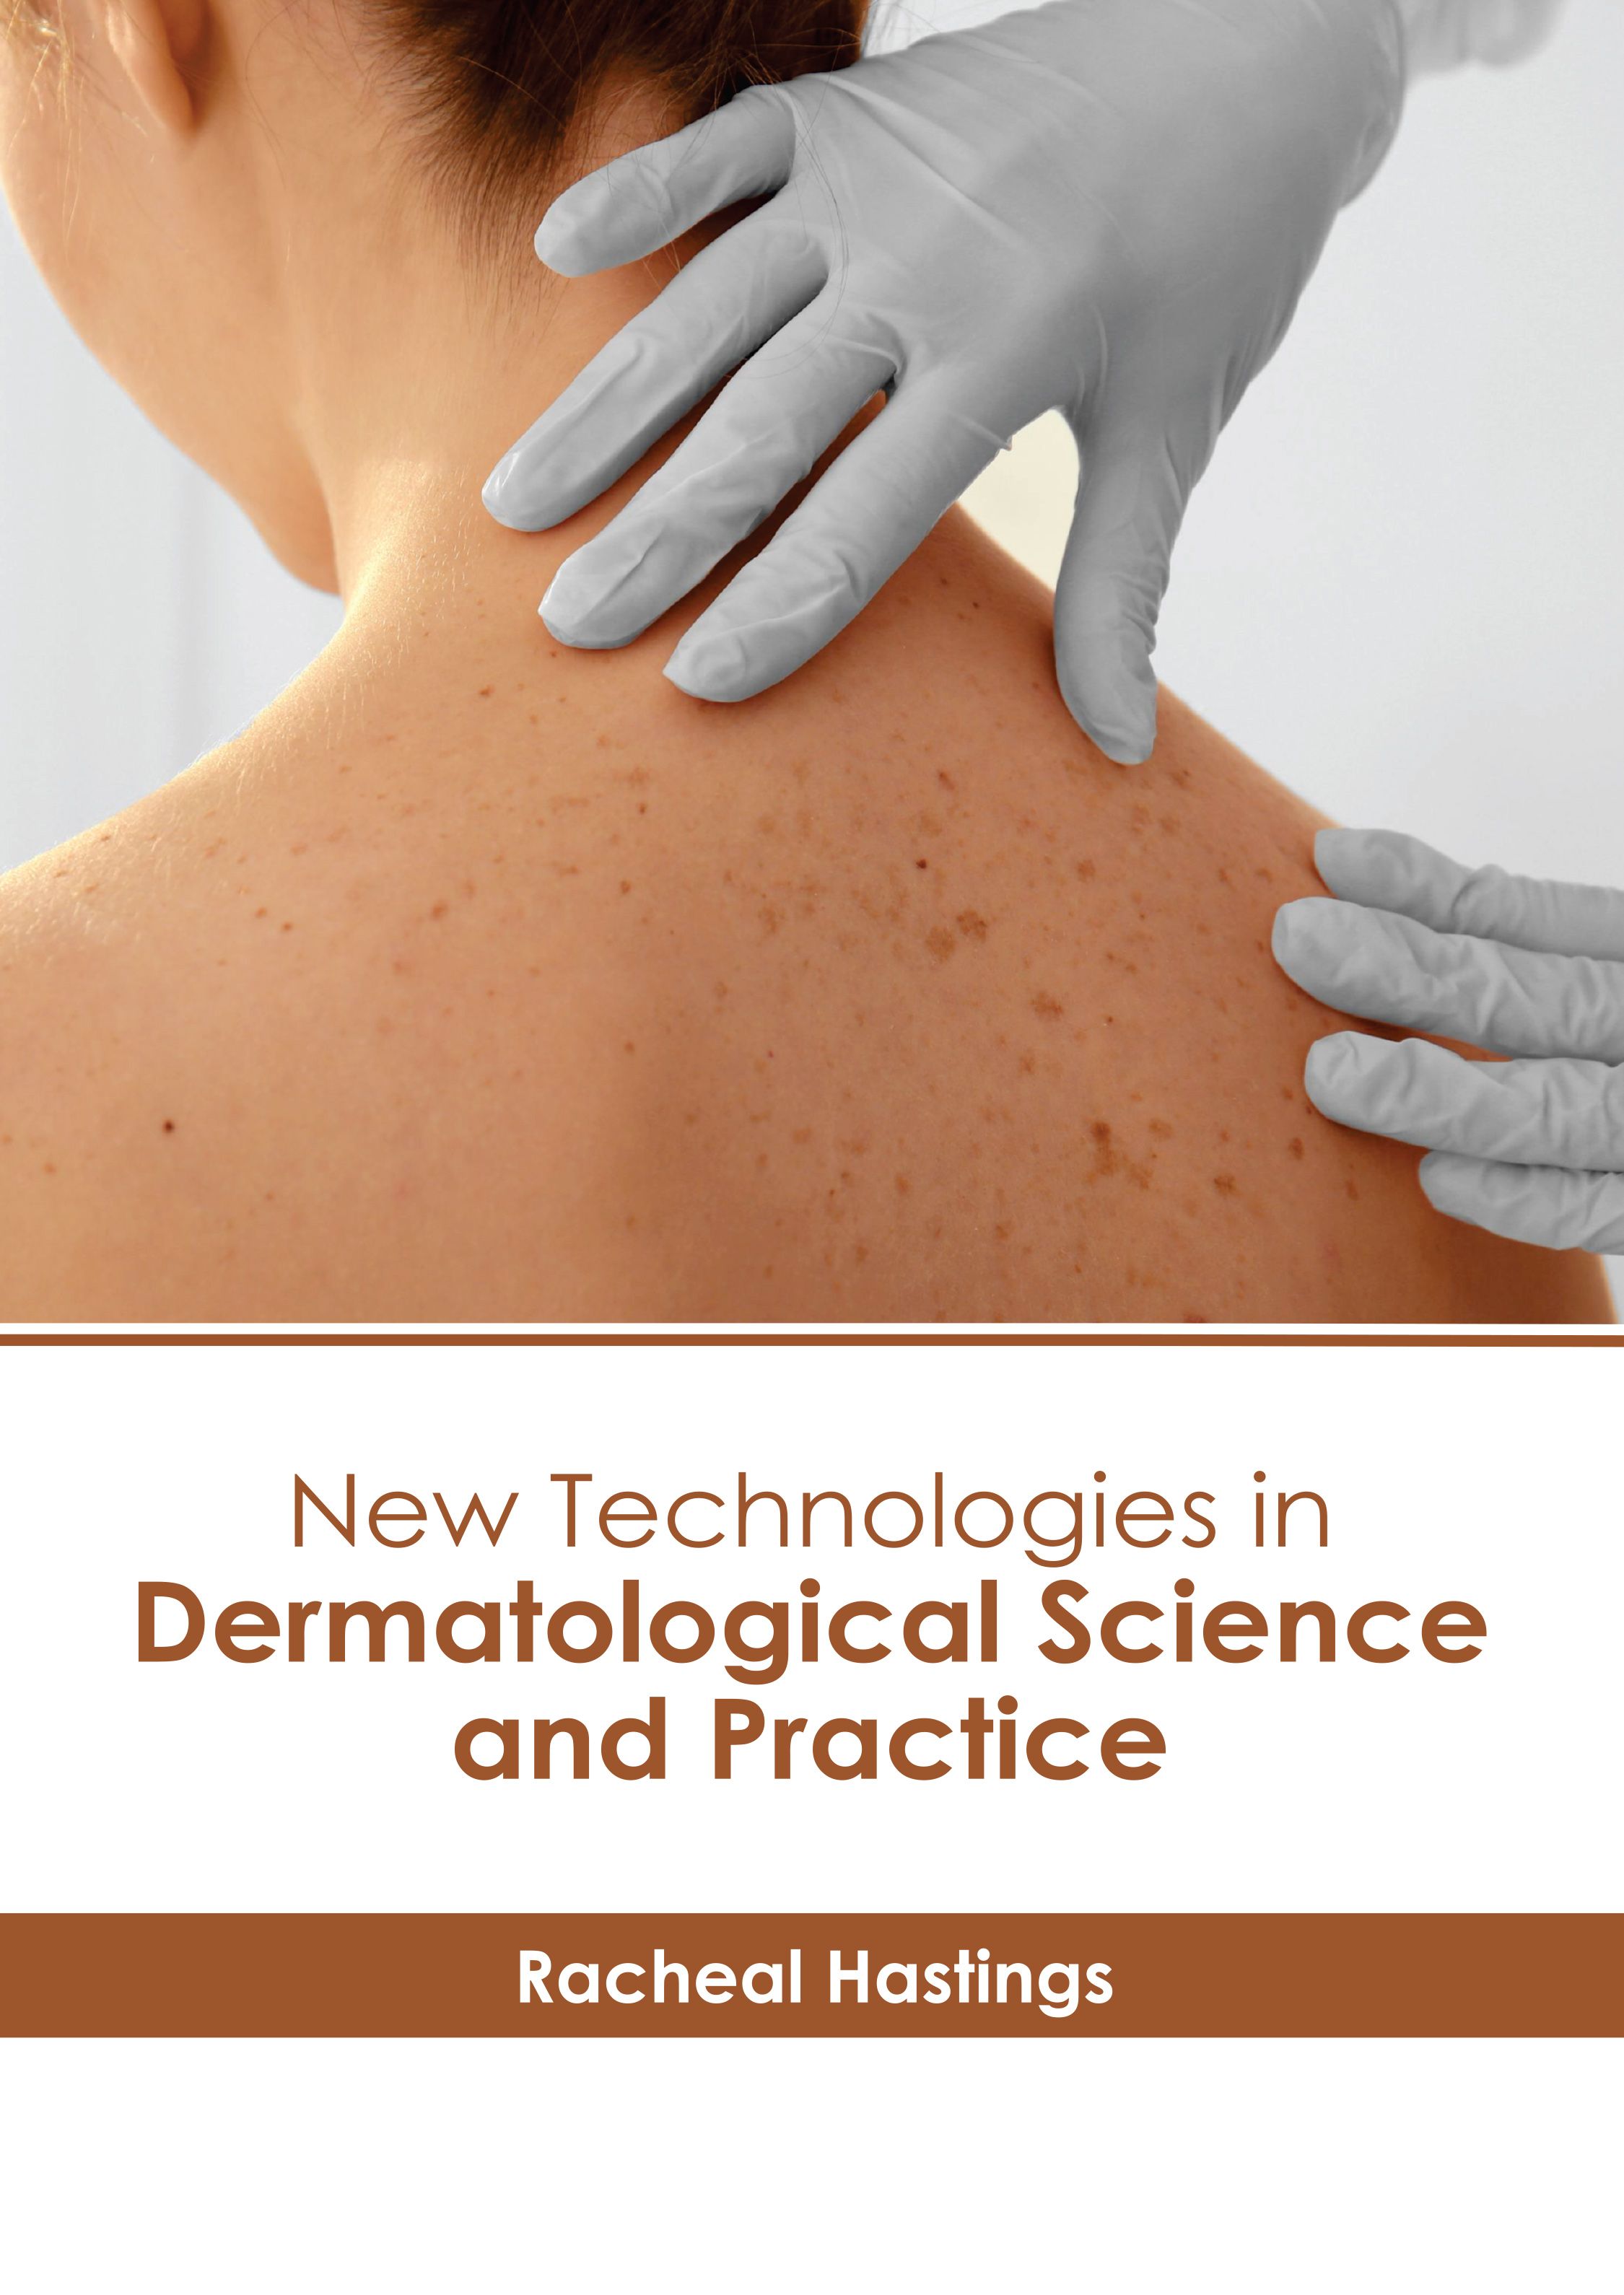 NEW TECHNOLOGIES IN DERMATOLOGICAL SCIENCE AND PRACTICE